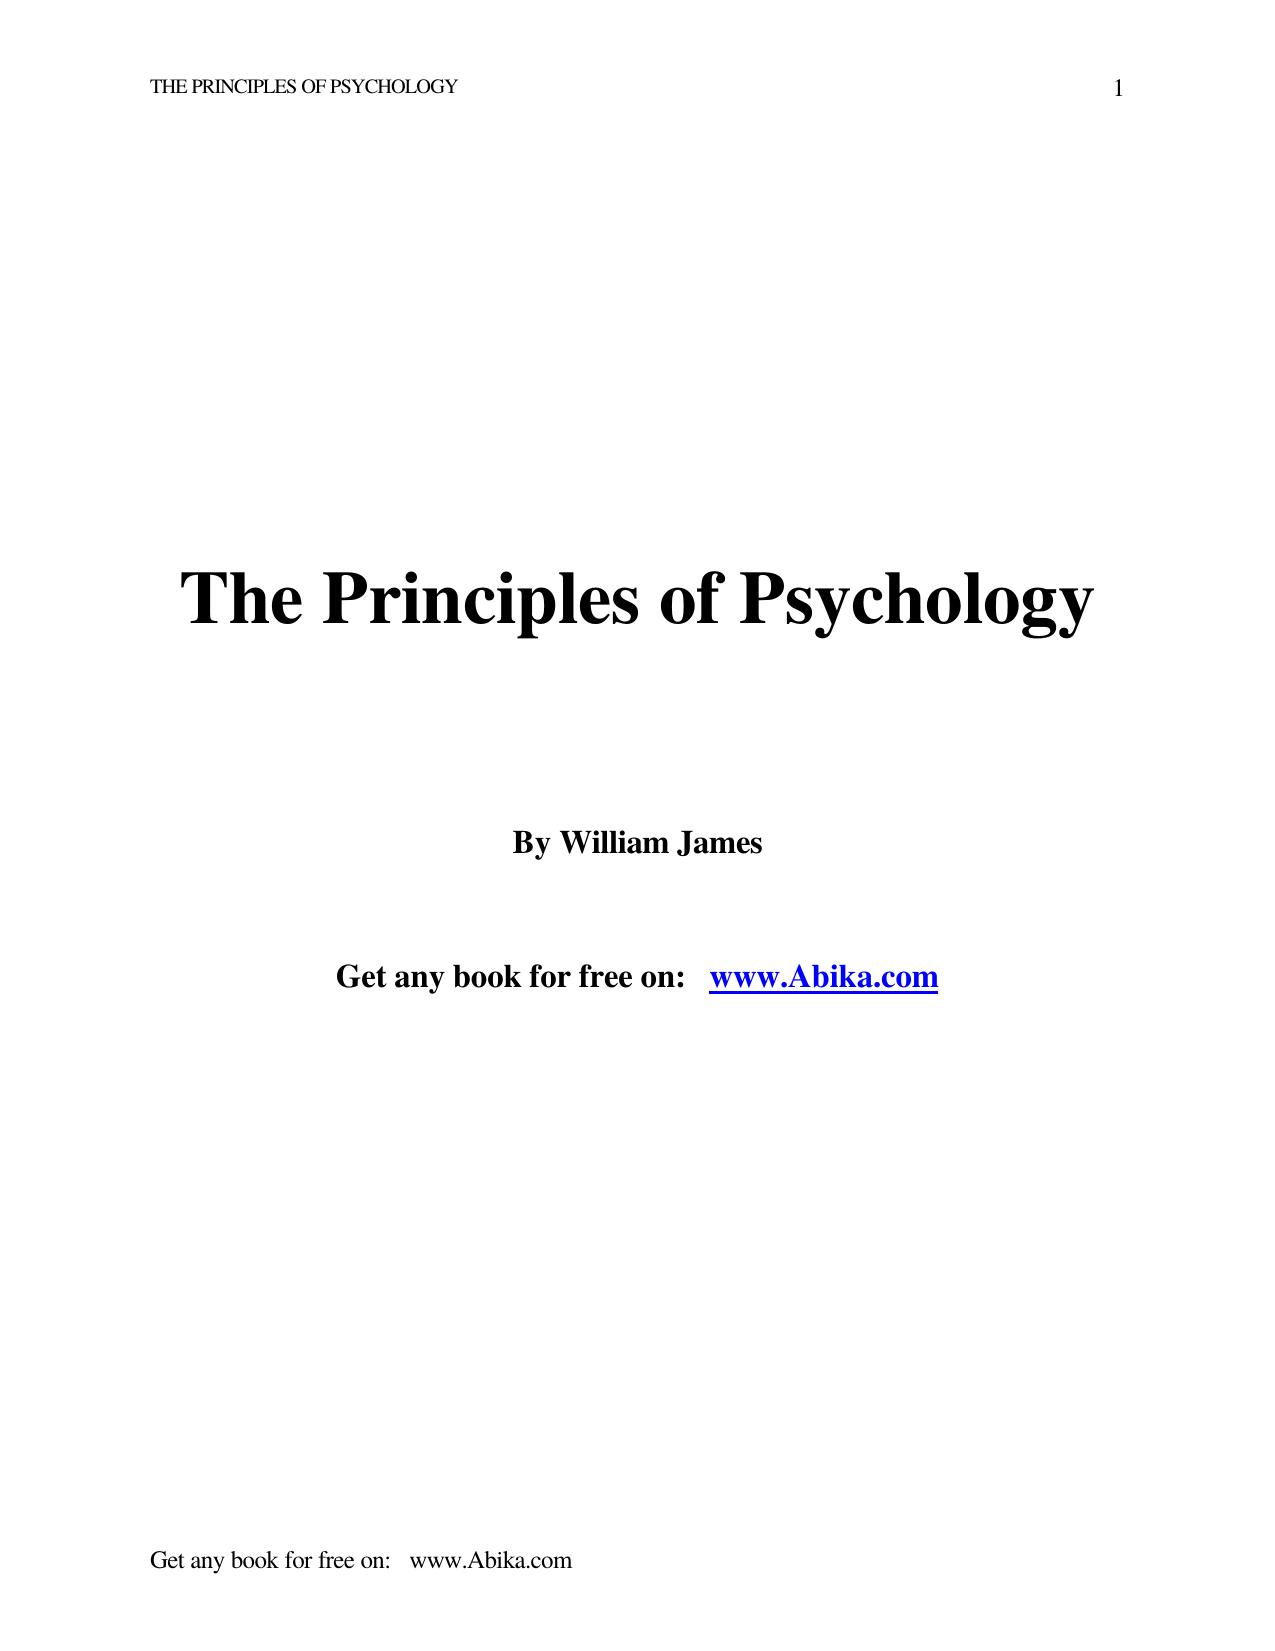 The Principles of Psychology 1 by William James